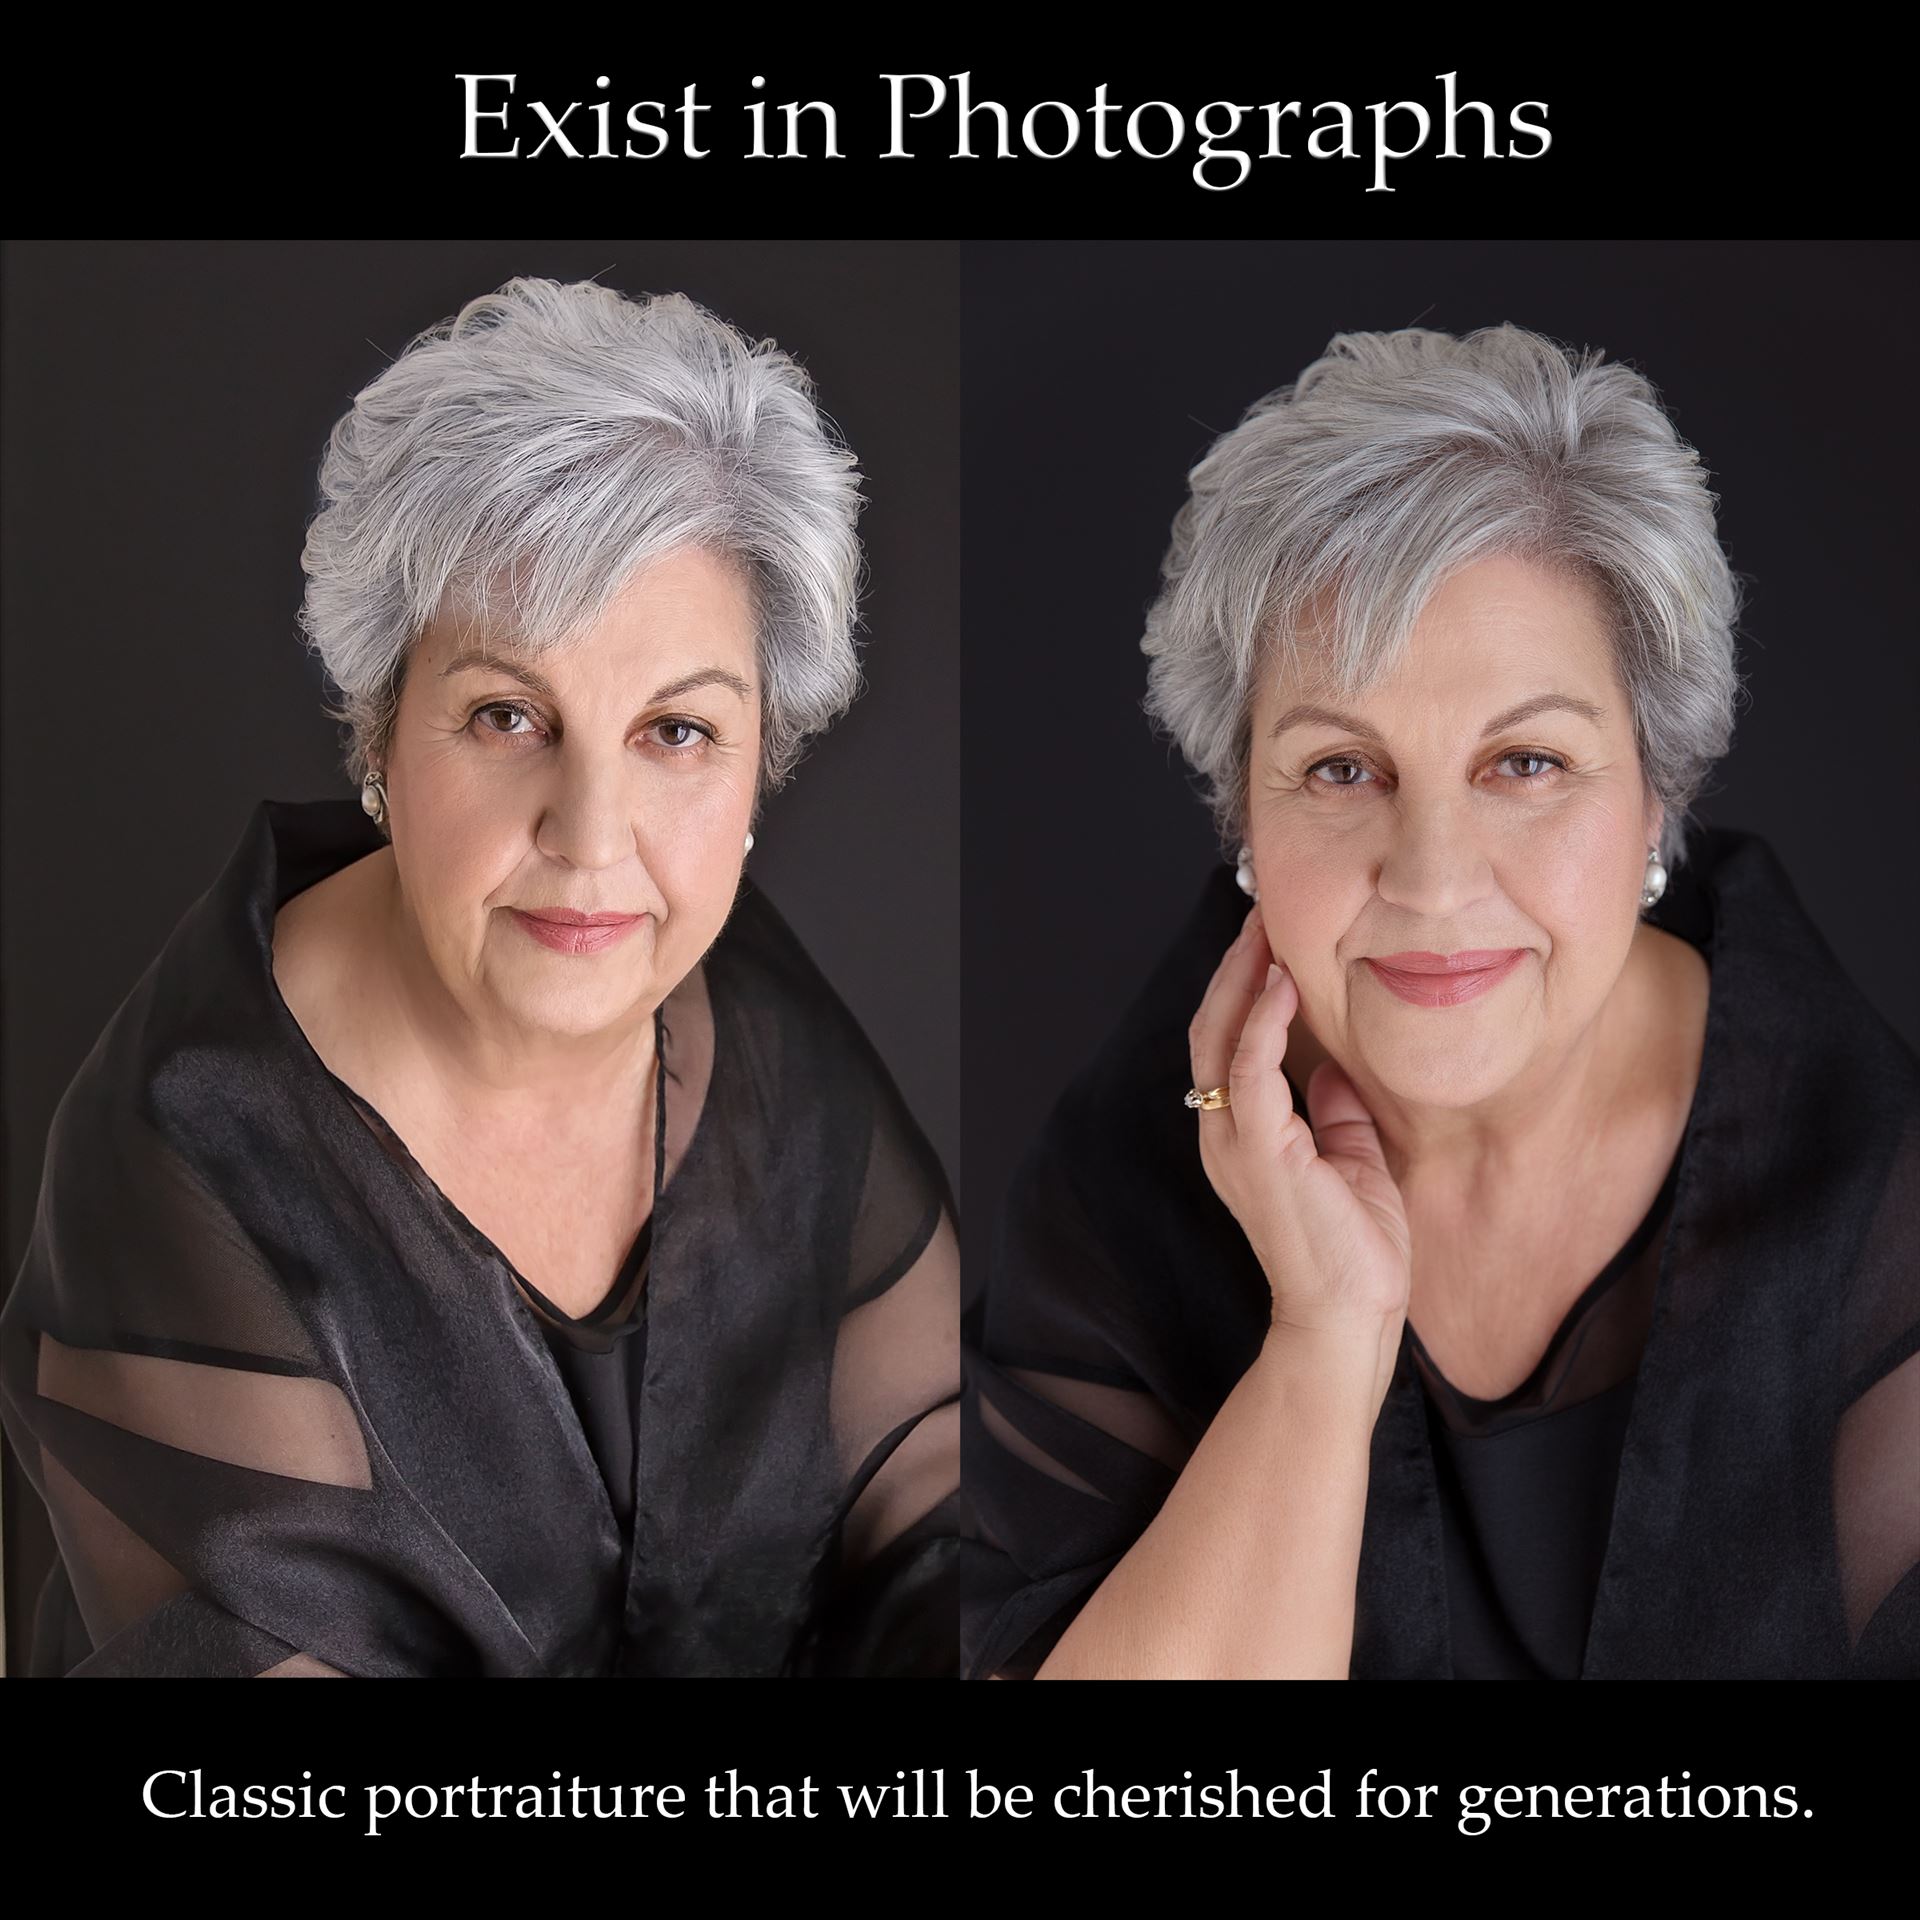 Exist-in-Photographs.jpg beauty portraits, beauty, portrait, headshot, personal branding by Maria Angelopoulos Photogrpahy